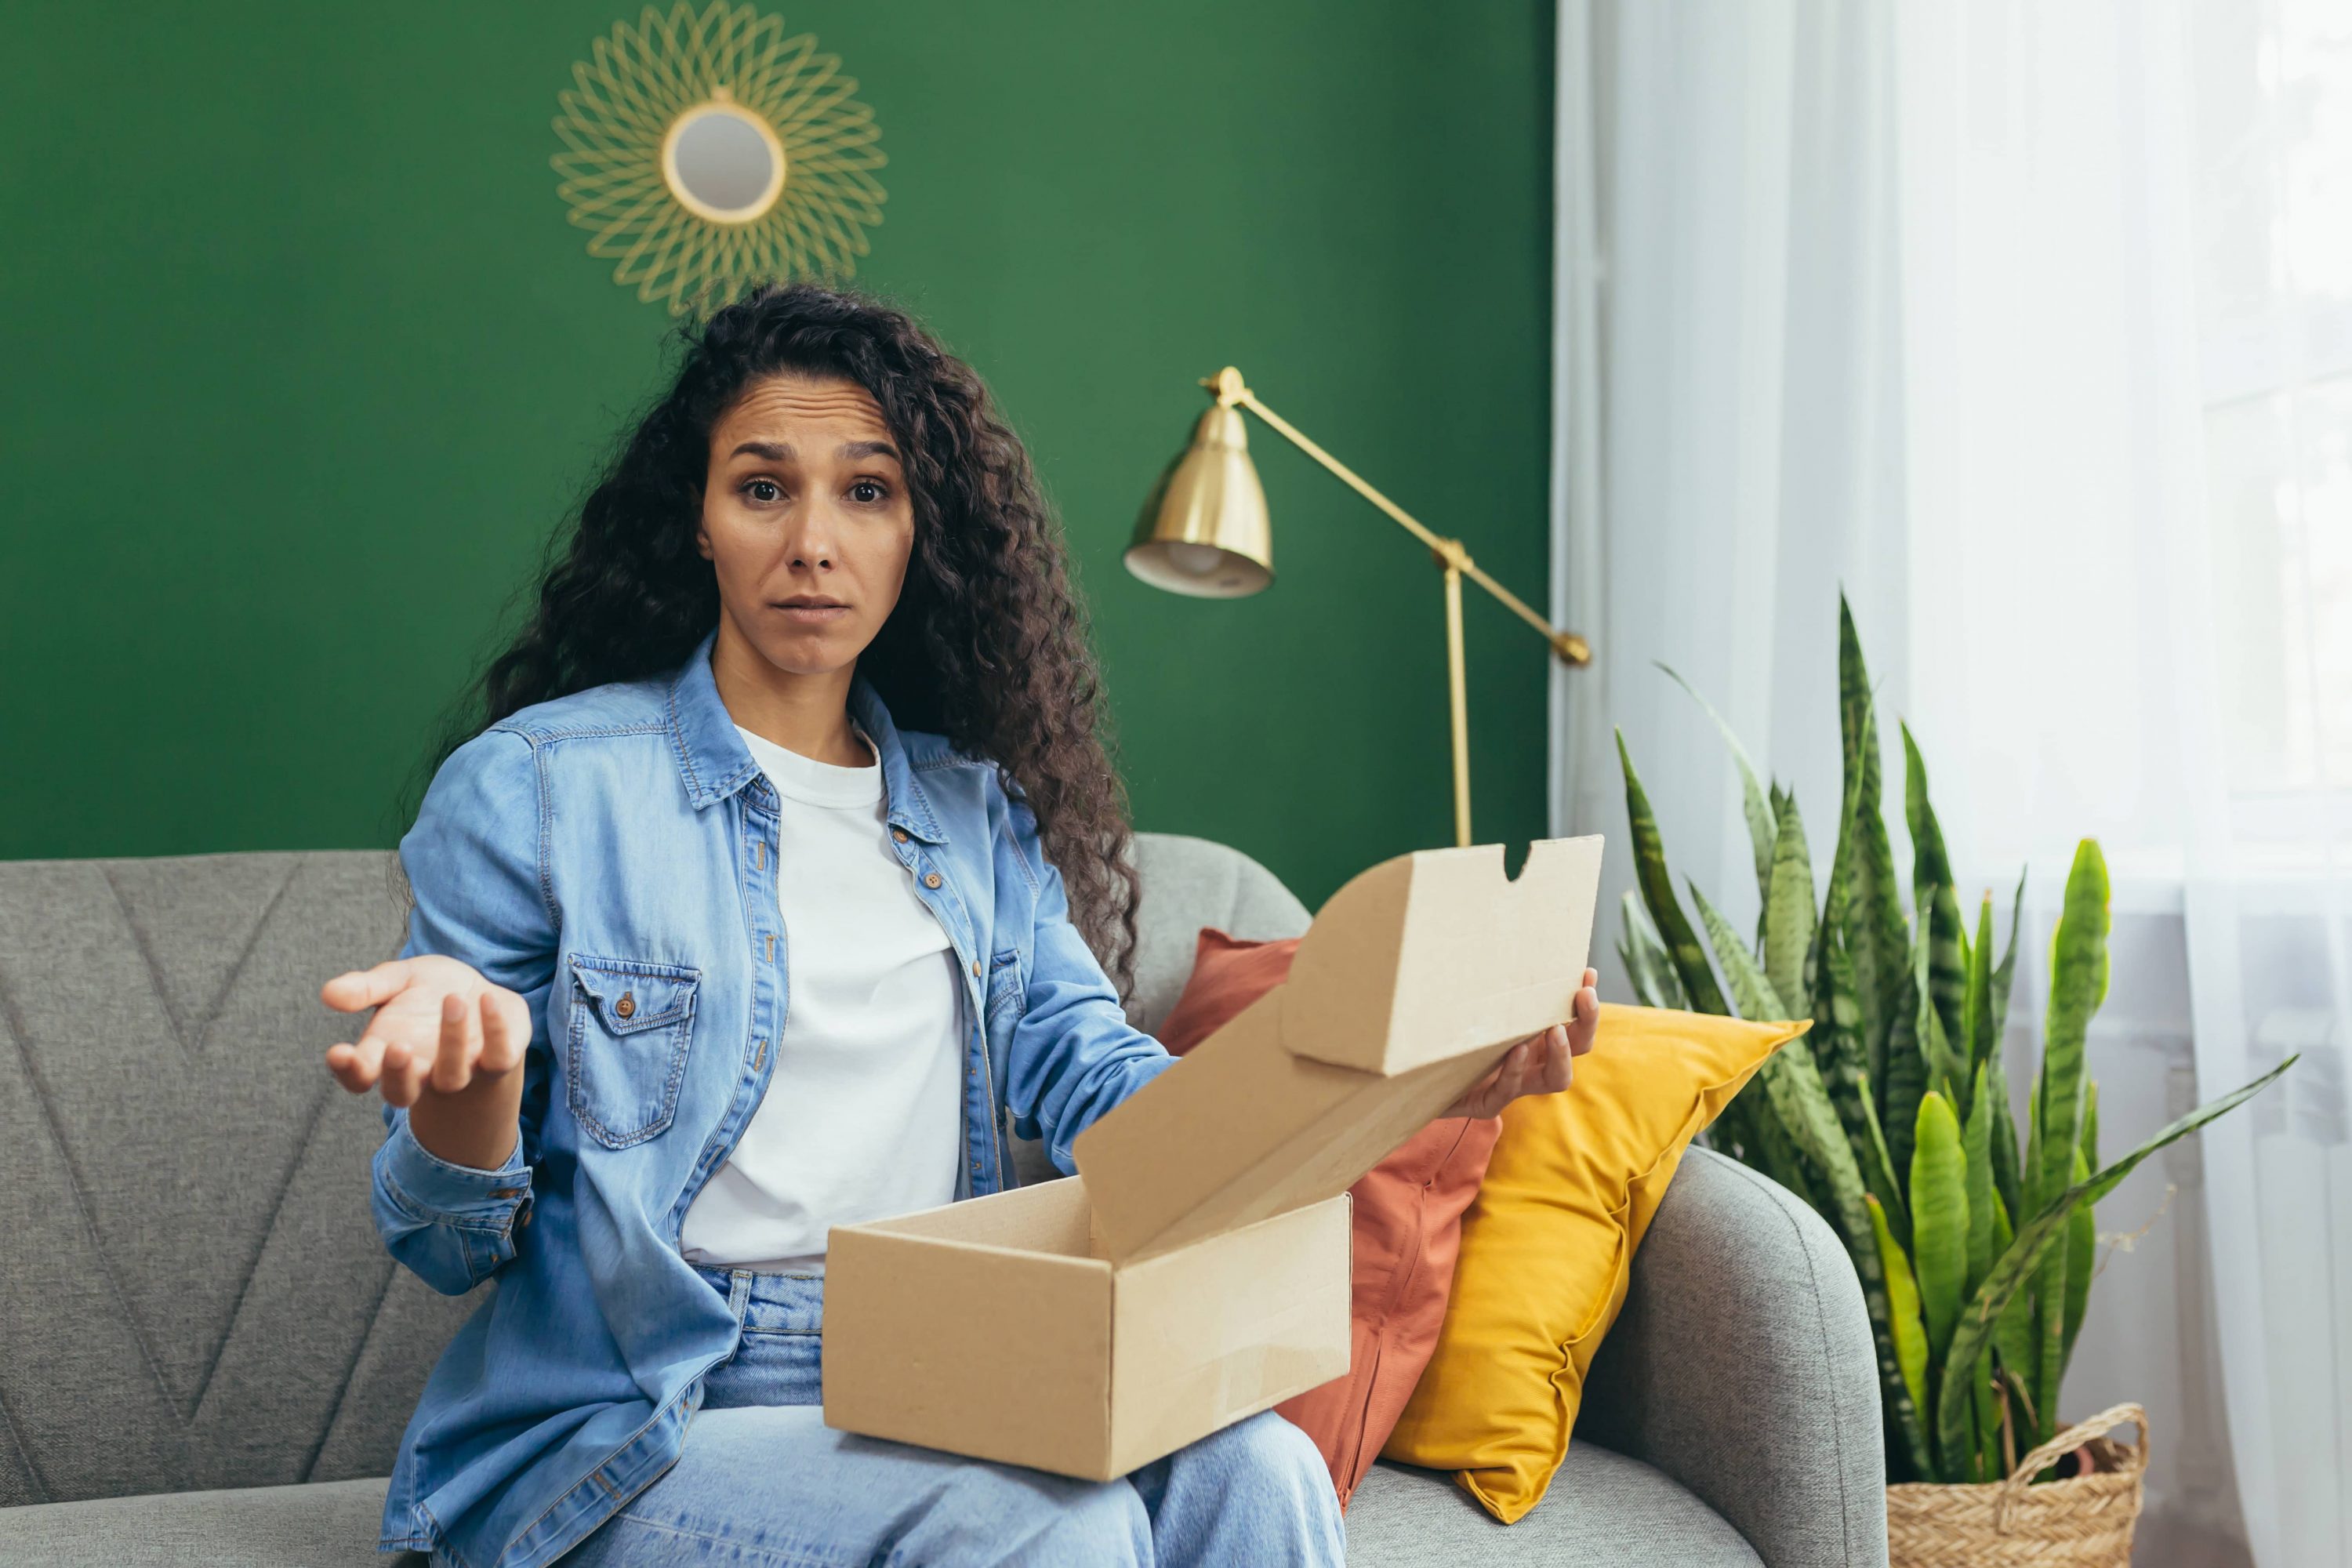 A woman sits on a couch with a box in front of her, possibly related to ecommerce returns.